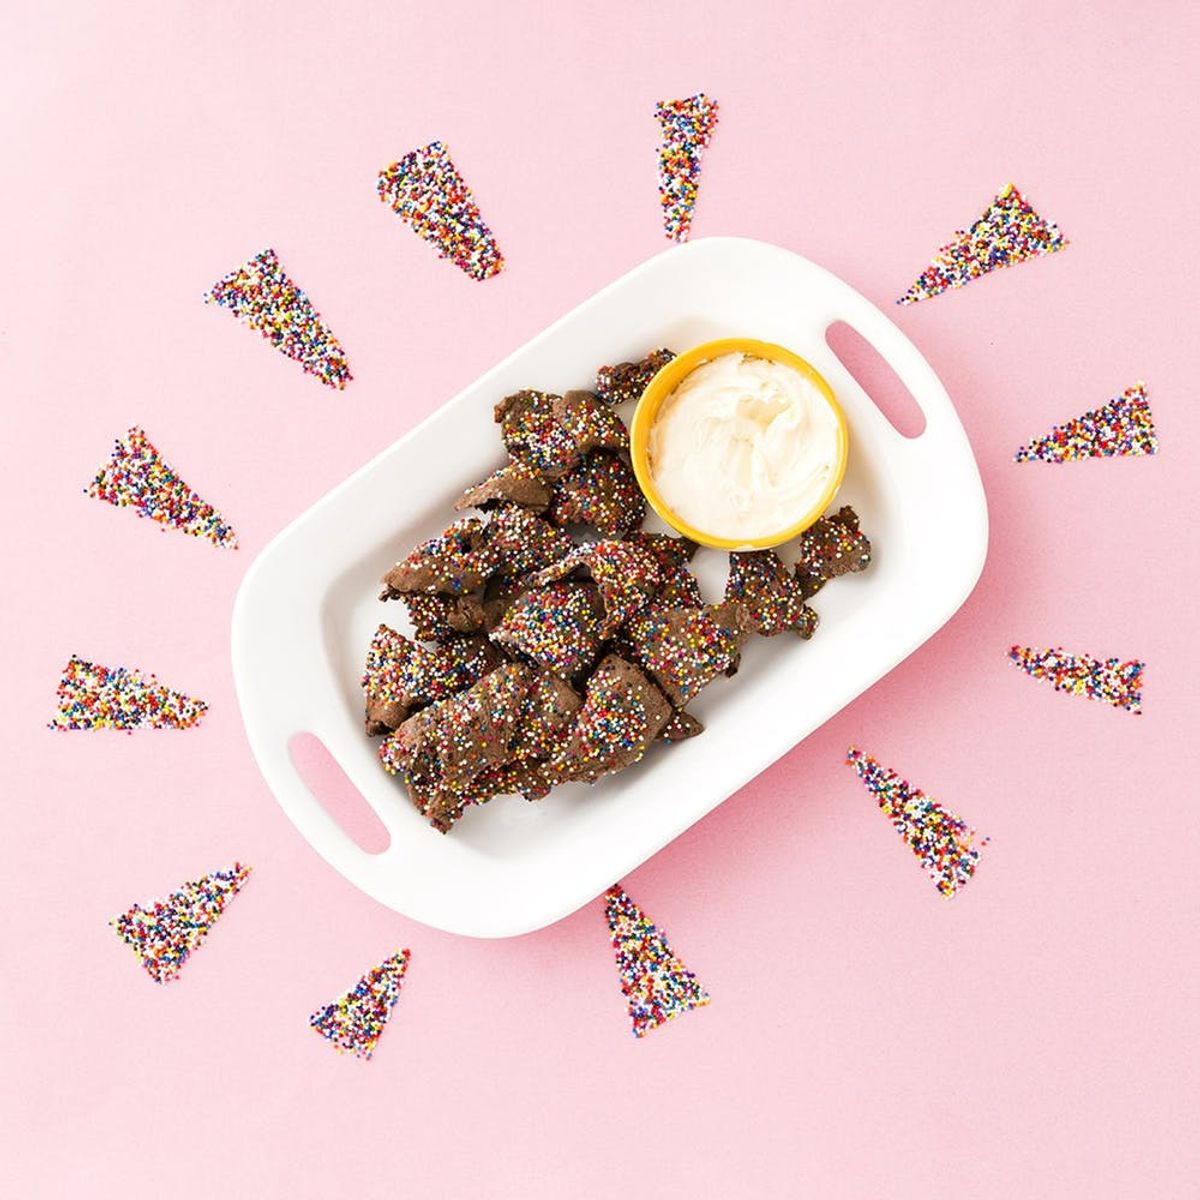 You Need These Chocolate Funfetti Nachos in Your Life